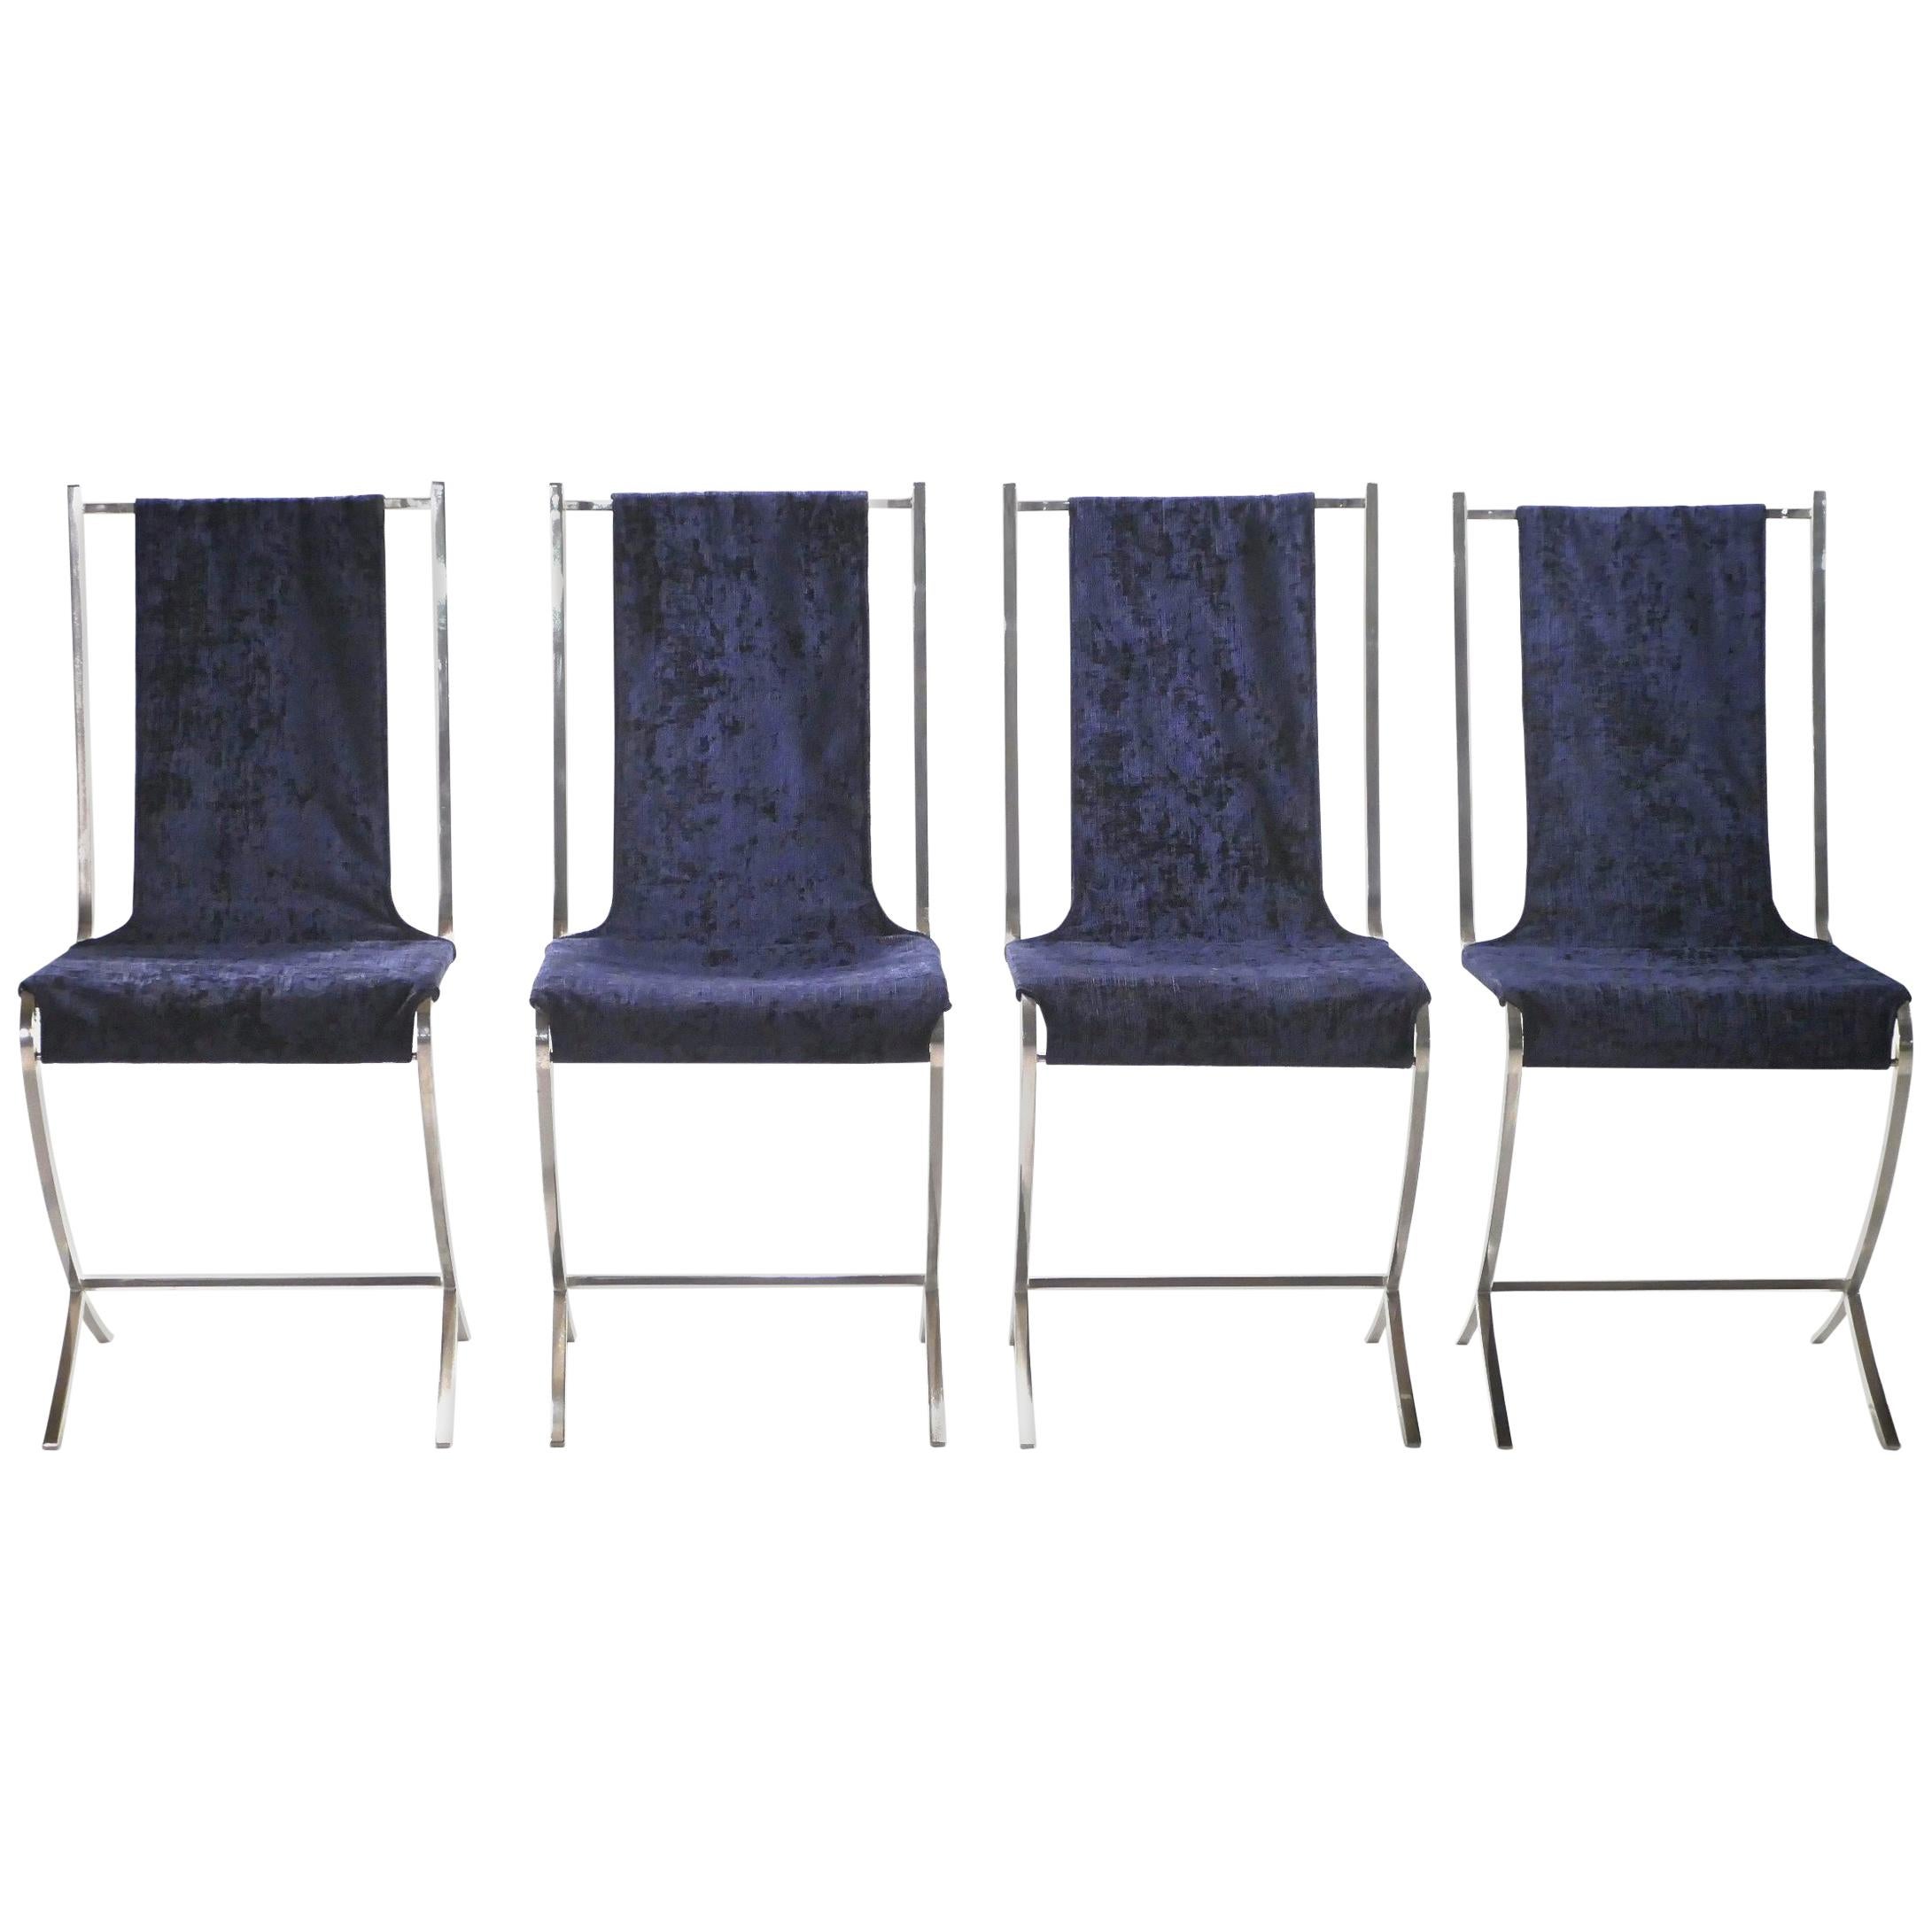 Set of Four Chairs by Pierre Cardin for Maison Jansen, 1970s